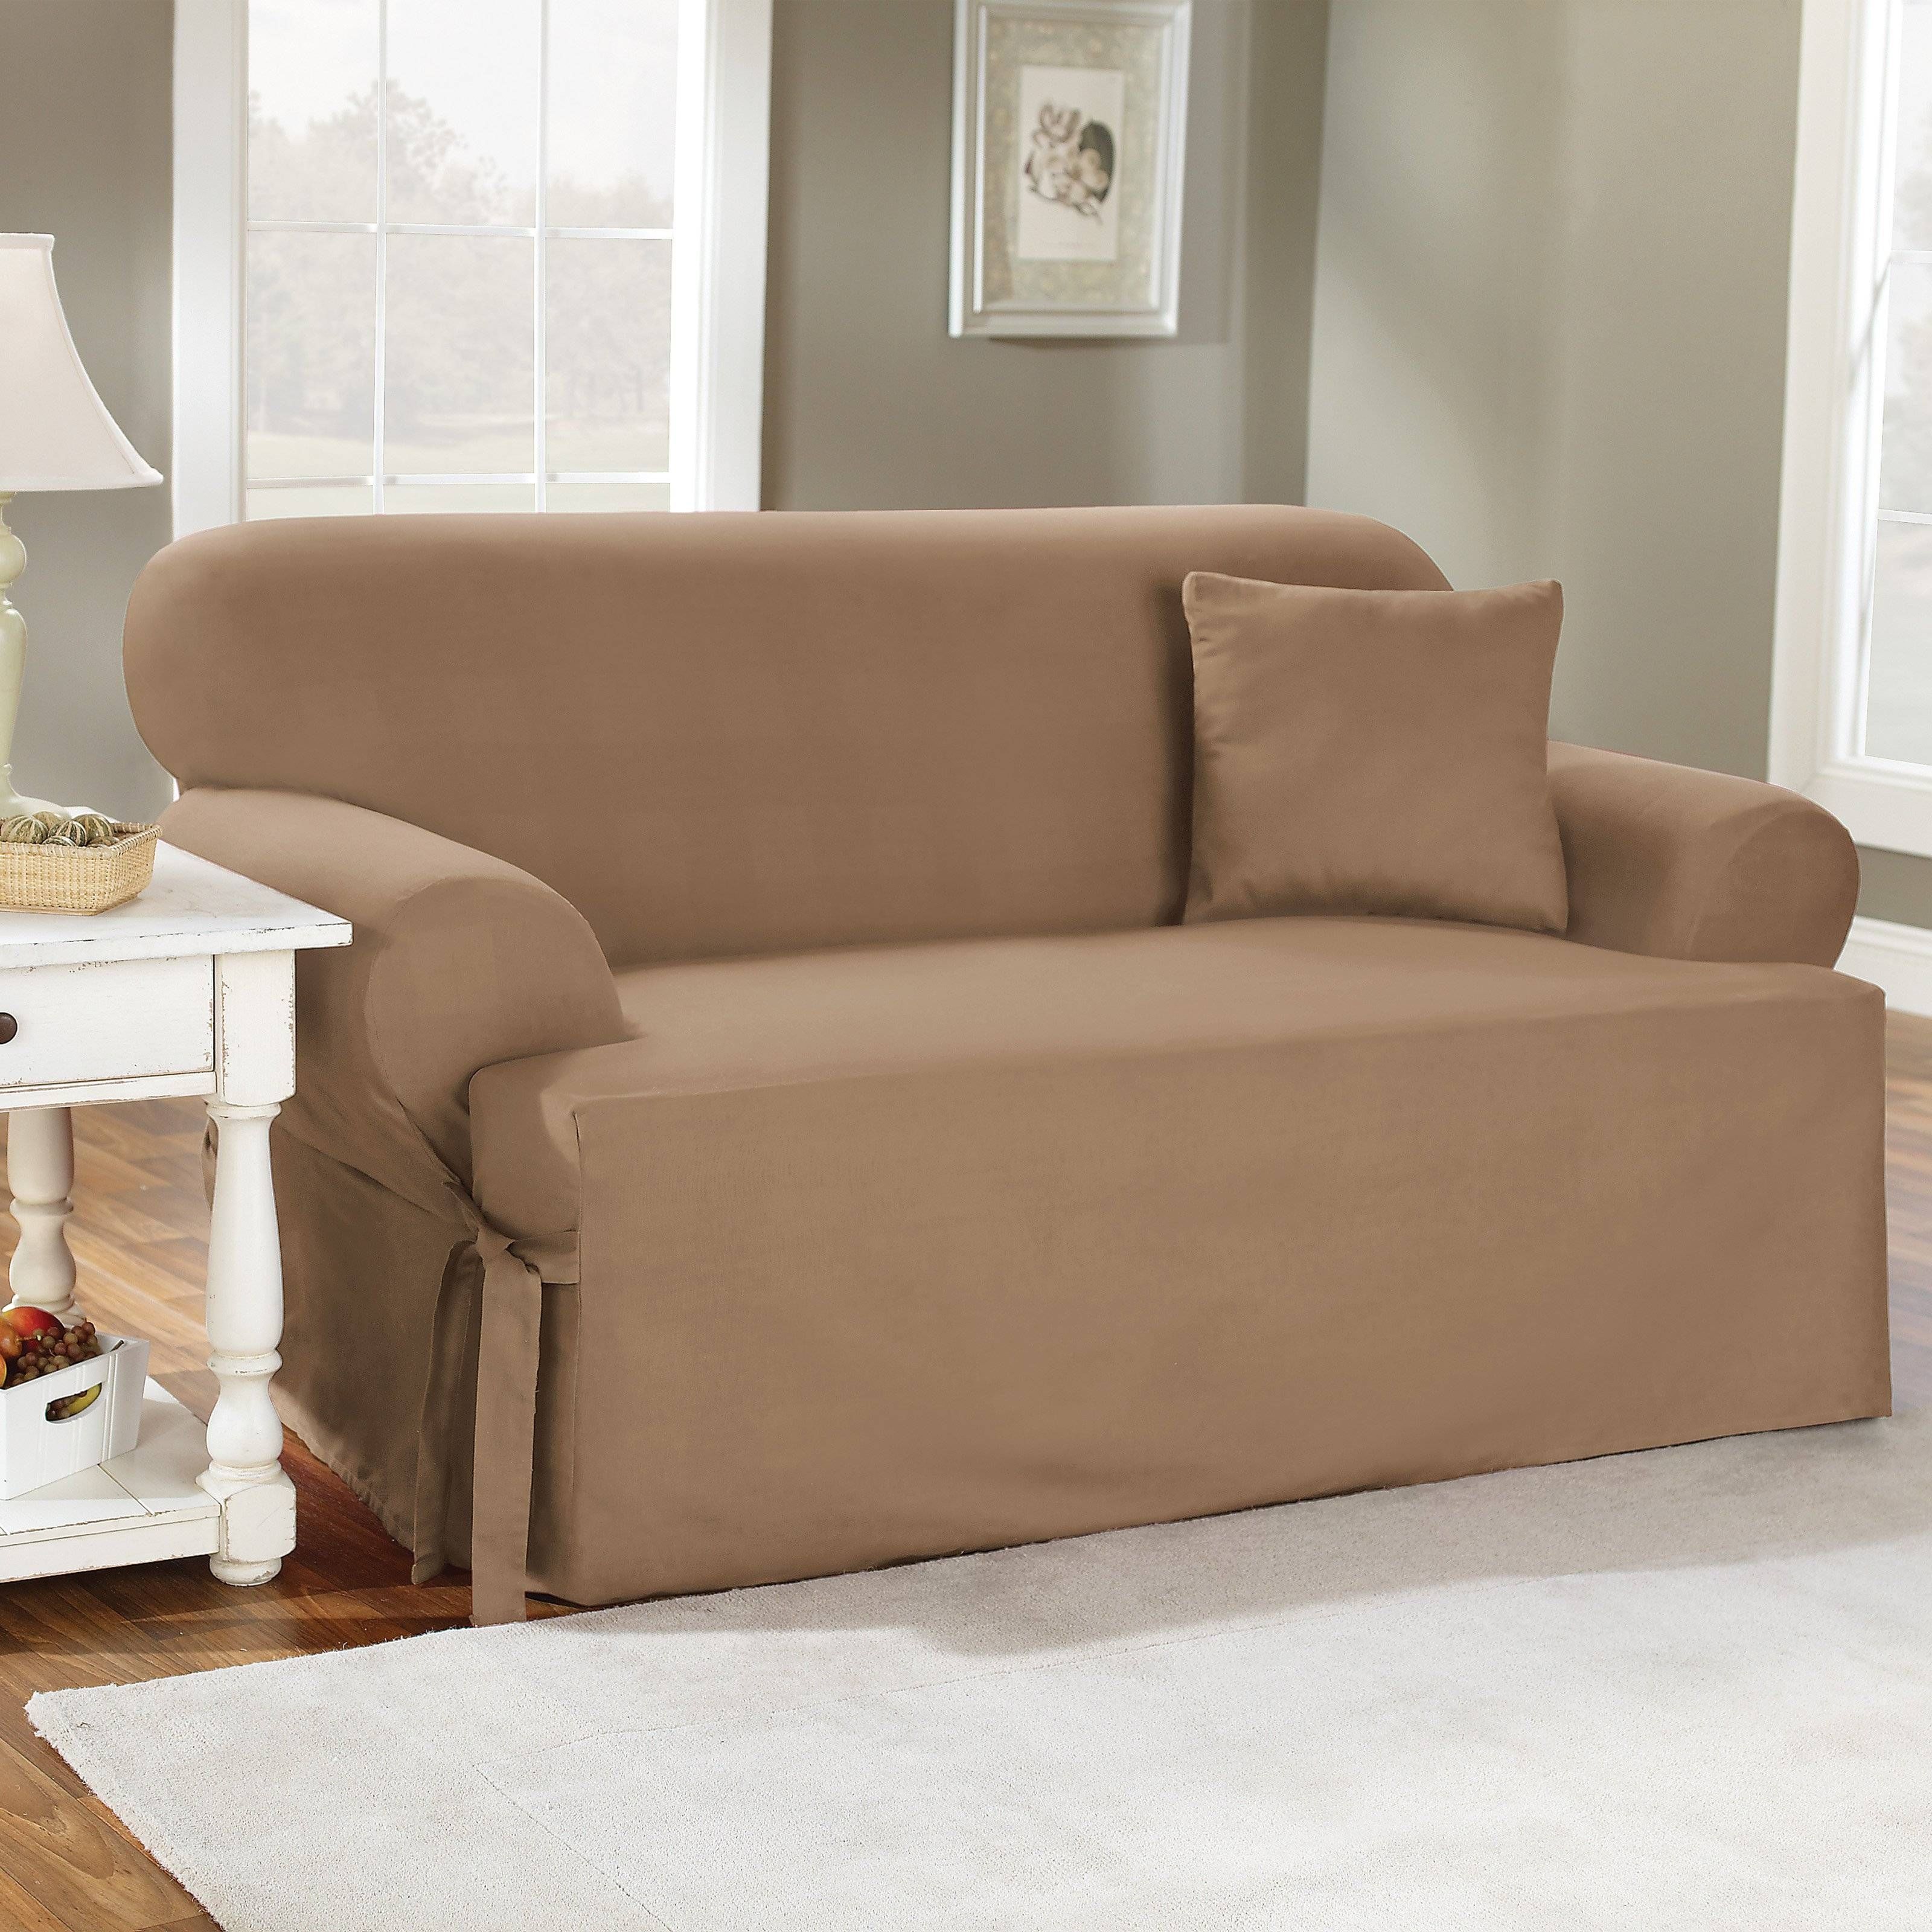 Tailor Fit Stretch Fit Sofa Slipcover | Hayneedle Intended For Slipcovers Sofas (View 8 of 30)